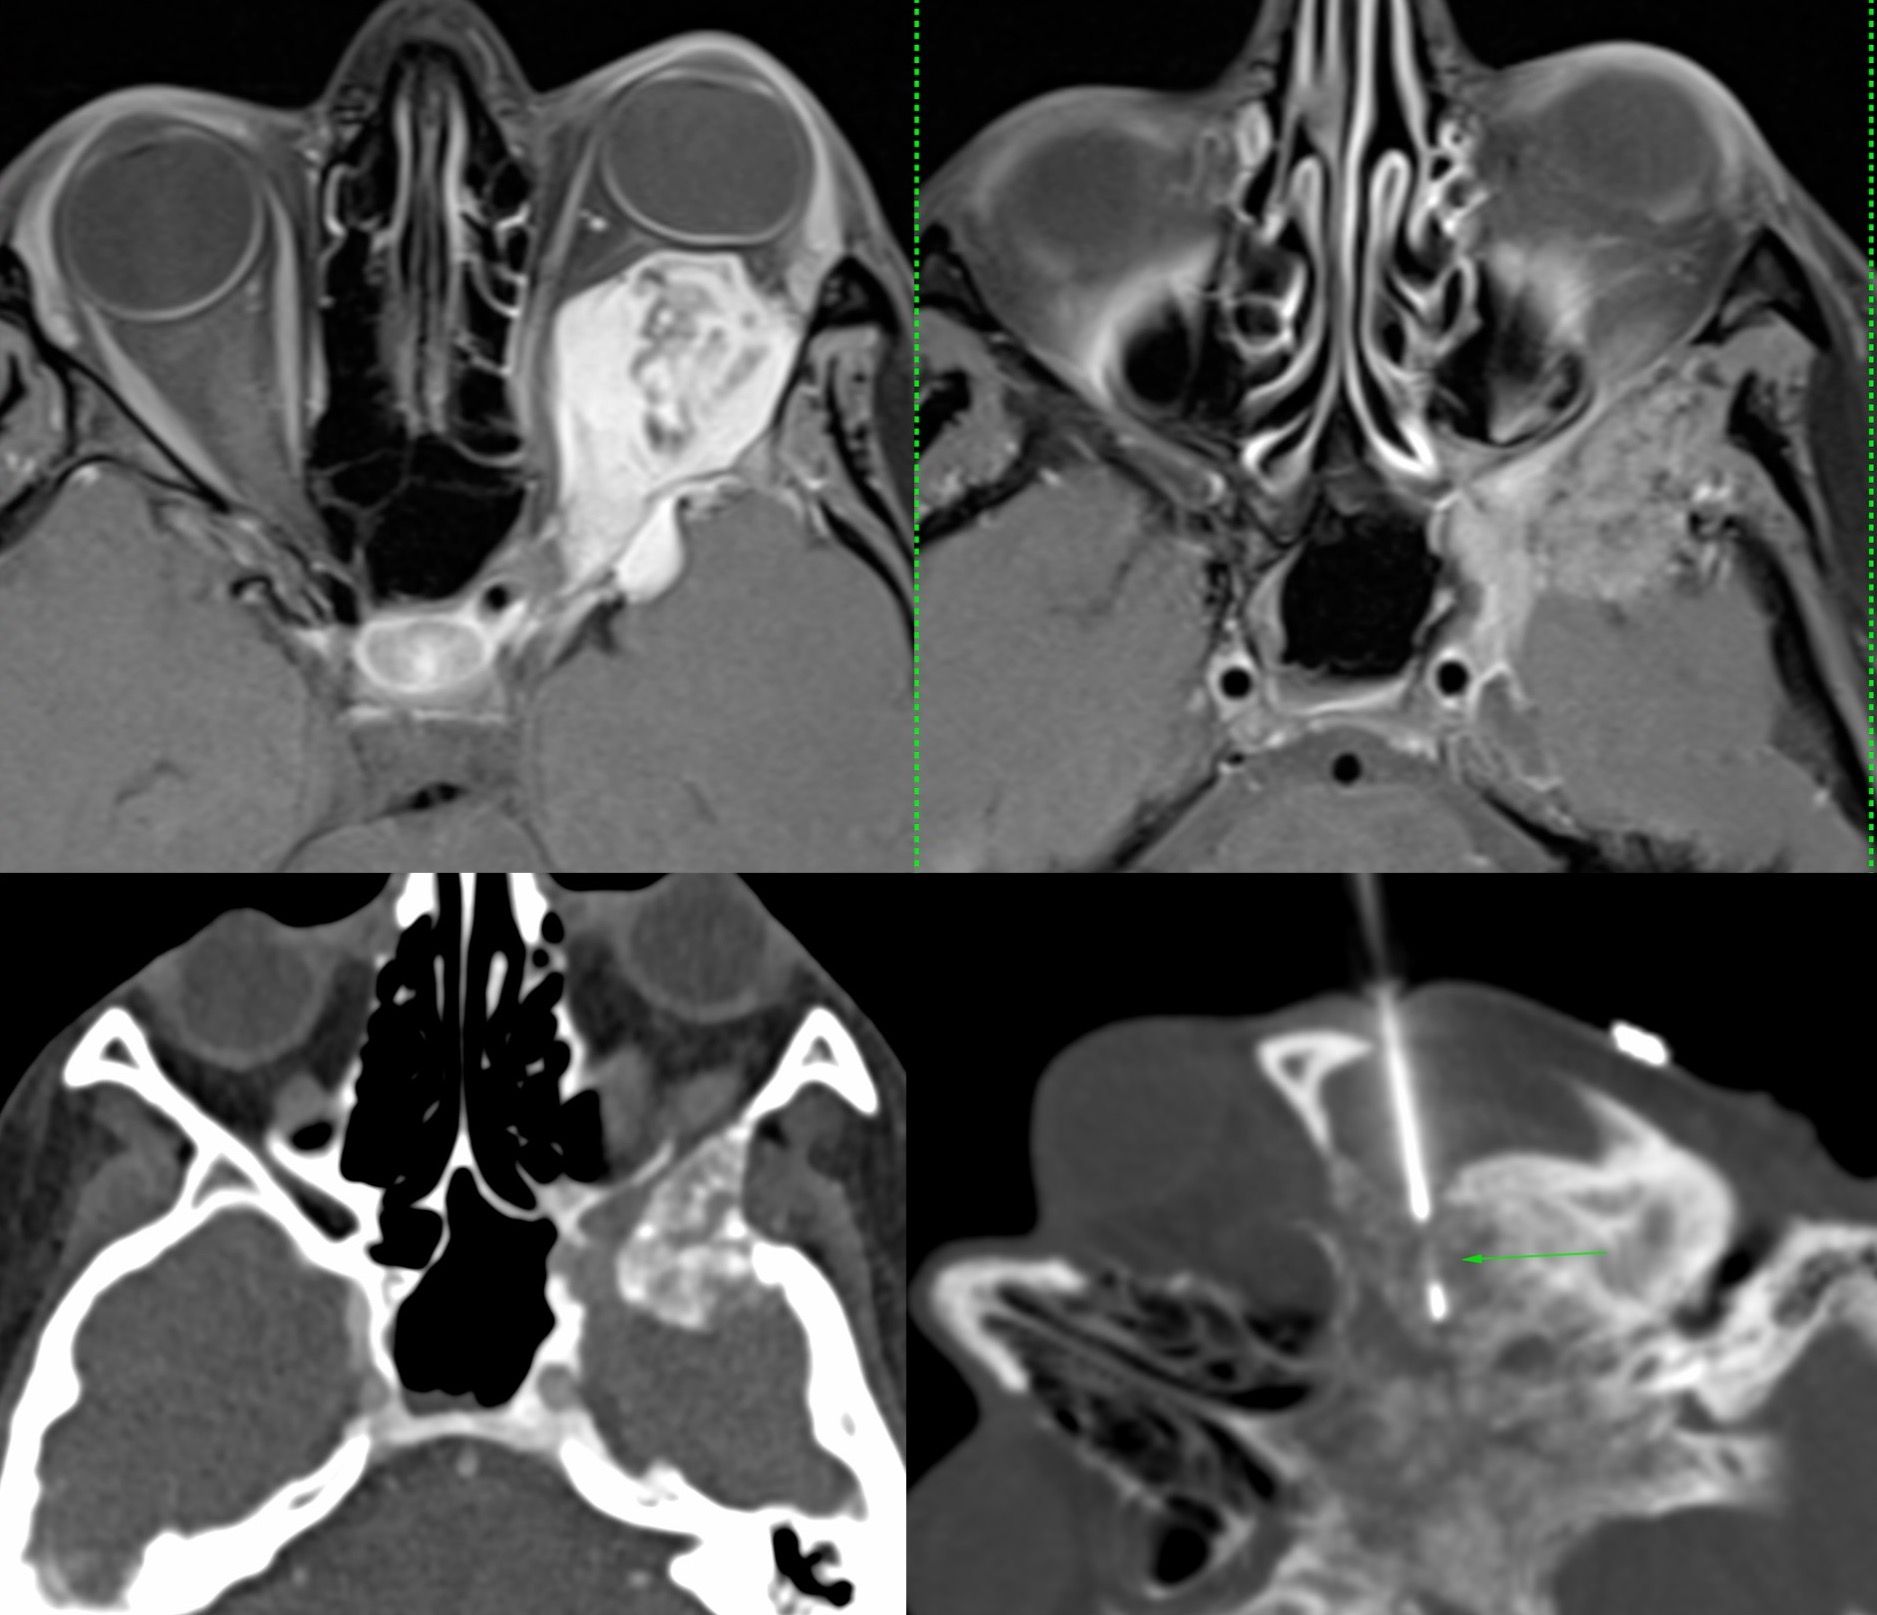 Case 23: Biopsy of Greater Wing of Sphenoid in a 25-Years Old for Recurrent Adenoid Cystic Carcinoma